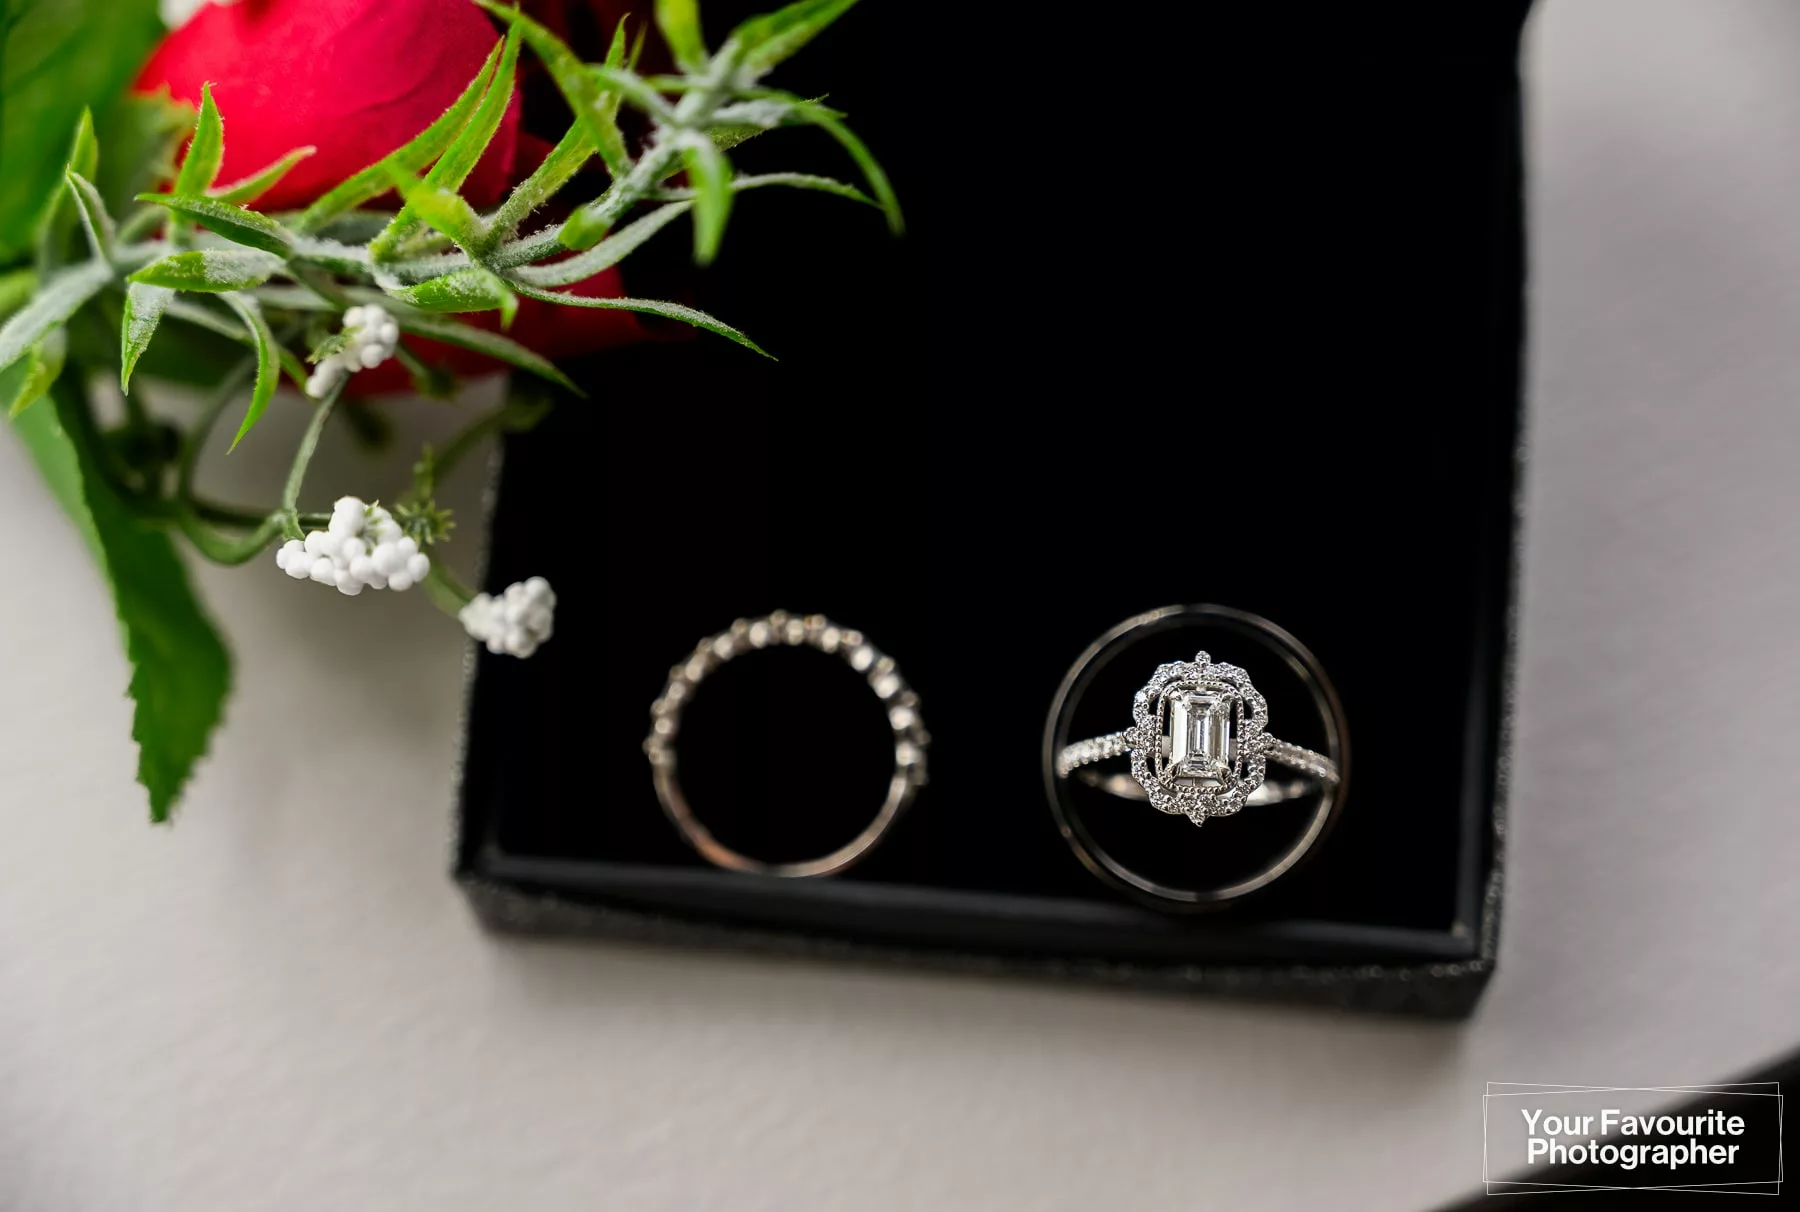 Macro photo of wedding rings in ring box with flowers